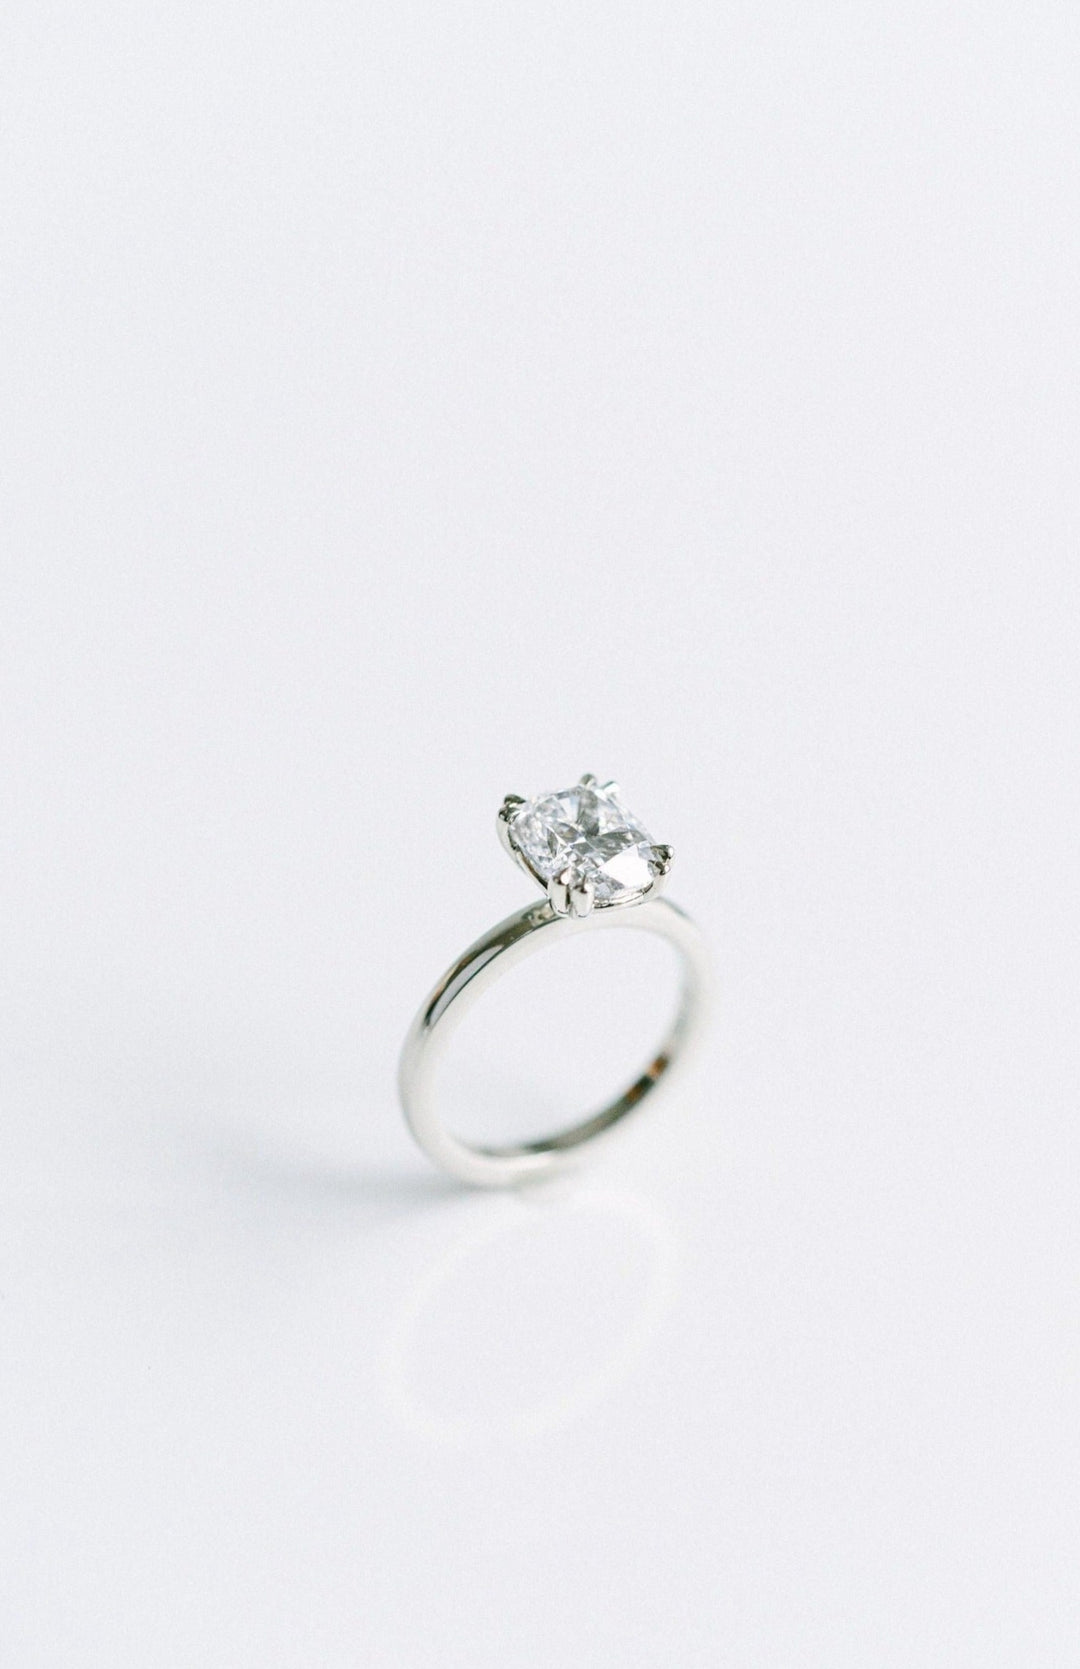 Cushion Cut Diamond Solitaire Engagement Ring With Double Prong Detail, 14k White Gold